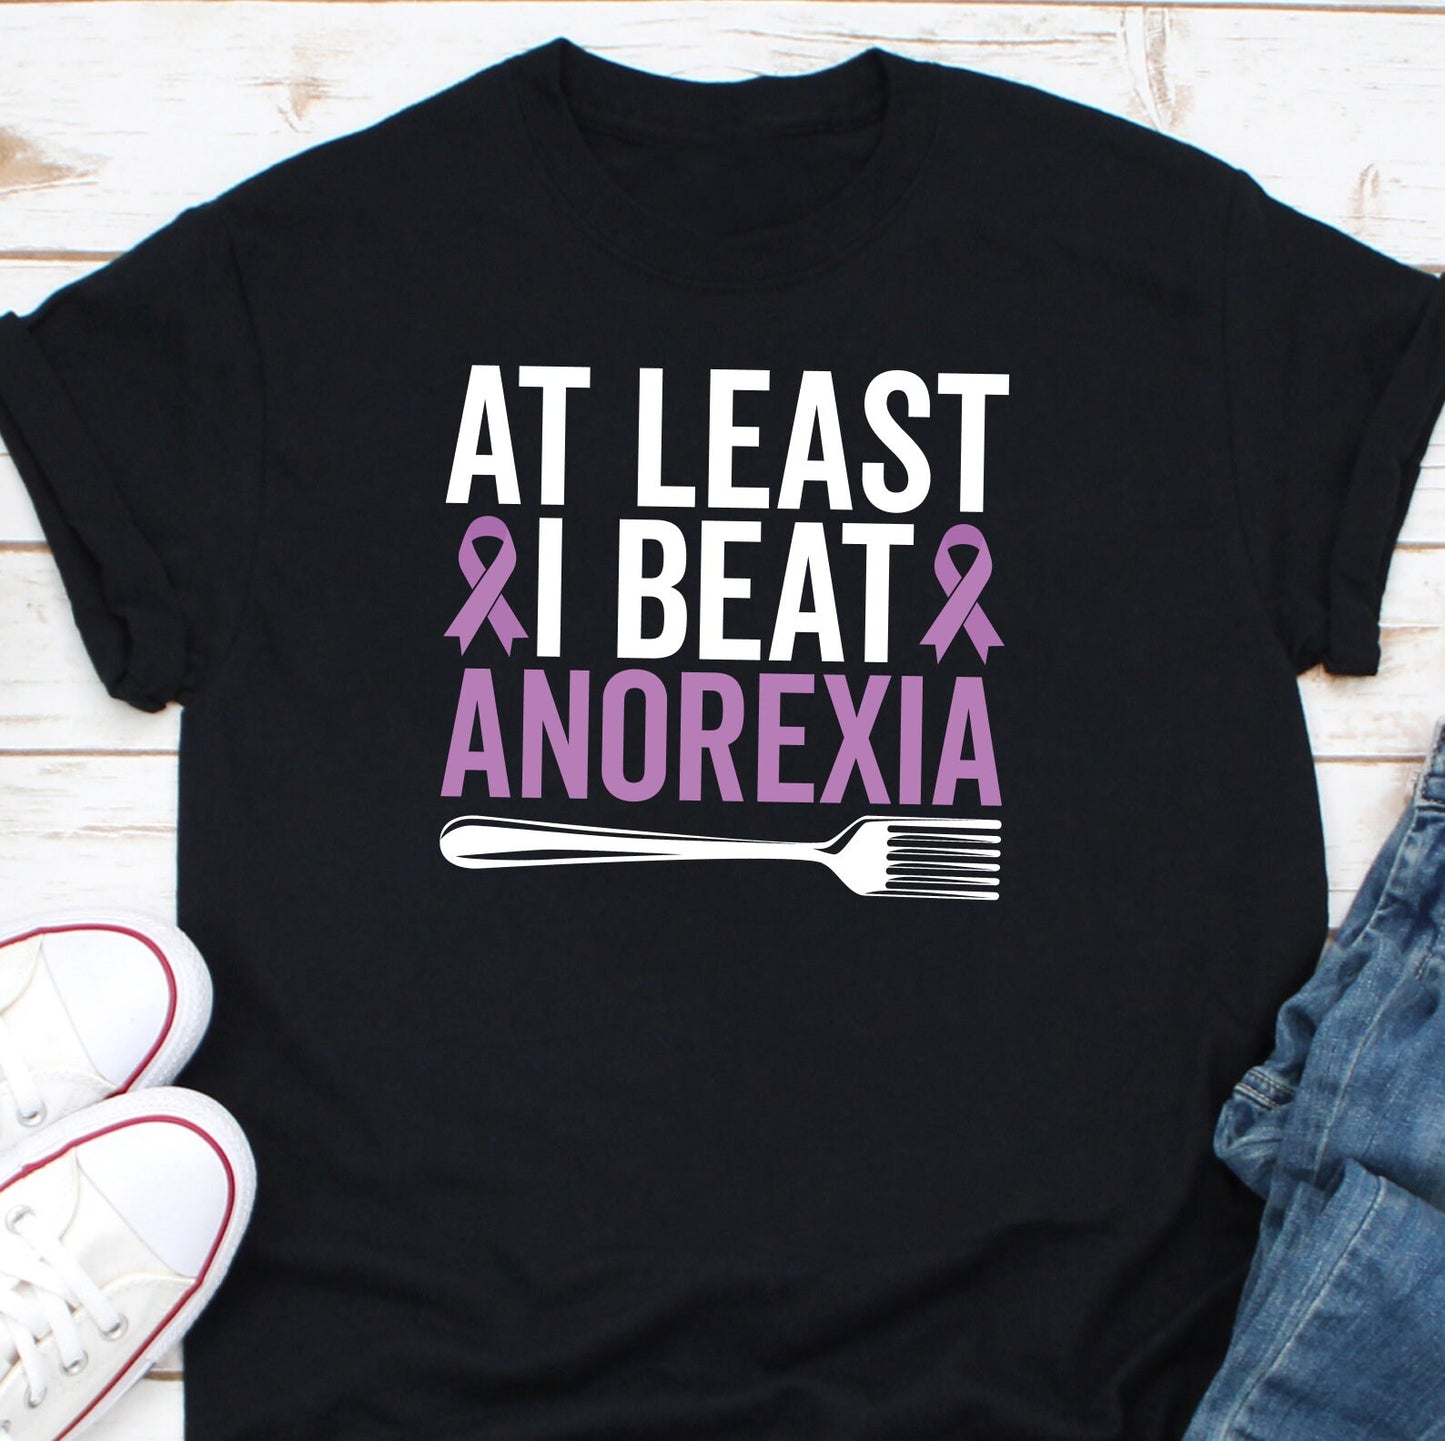 At Least I Beat Anorexia Shirt, Anorexia Disease Awareness Shirt, Anorexic Patient Warrior Shirt, Anorexia Nervosa Eating Disorder Shirt